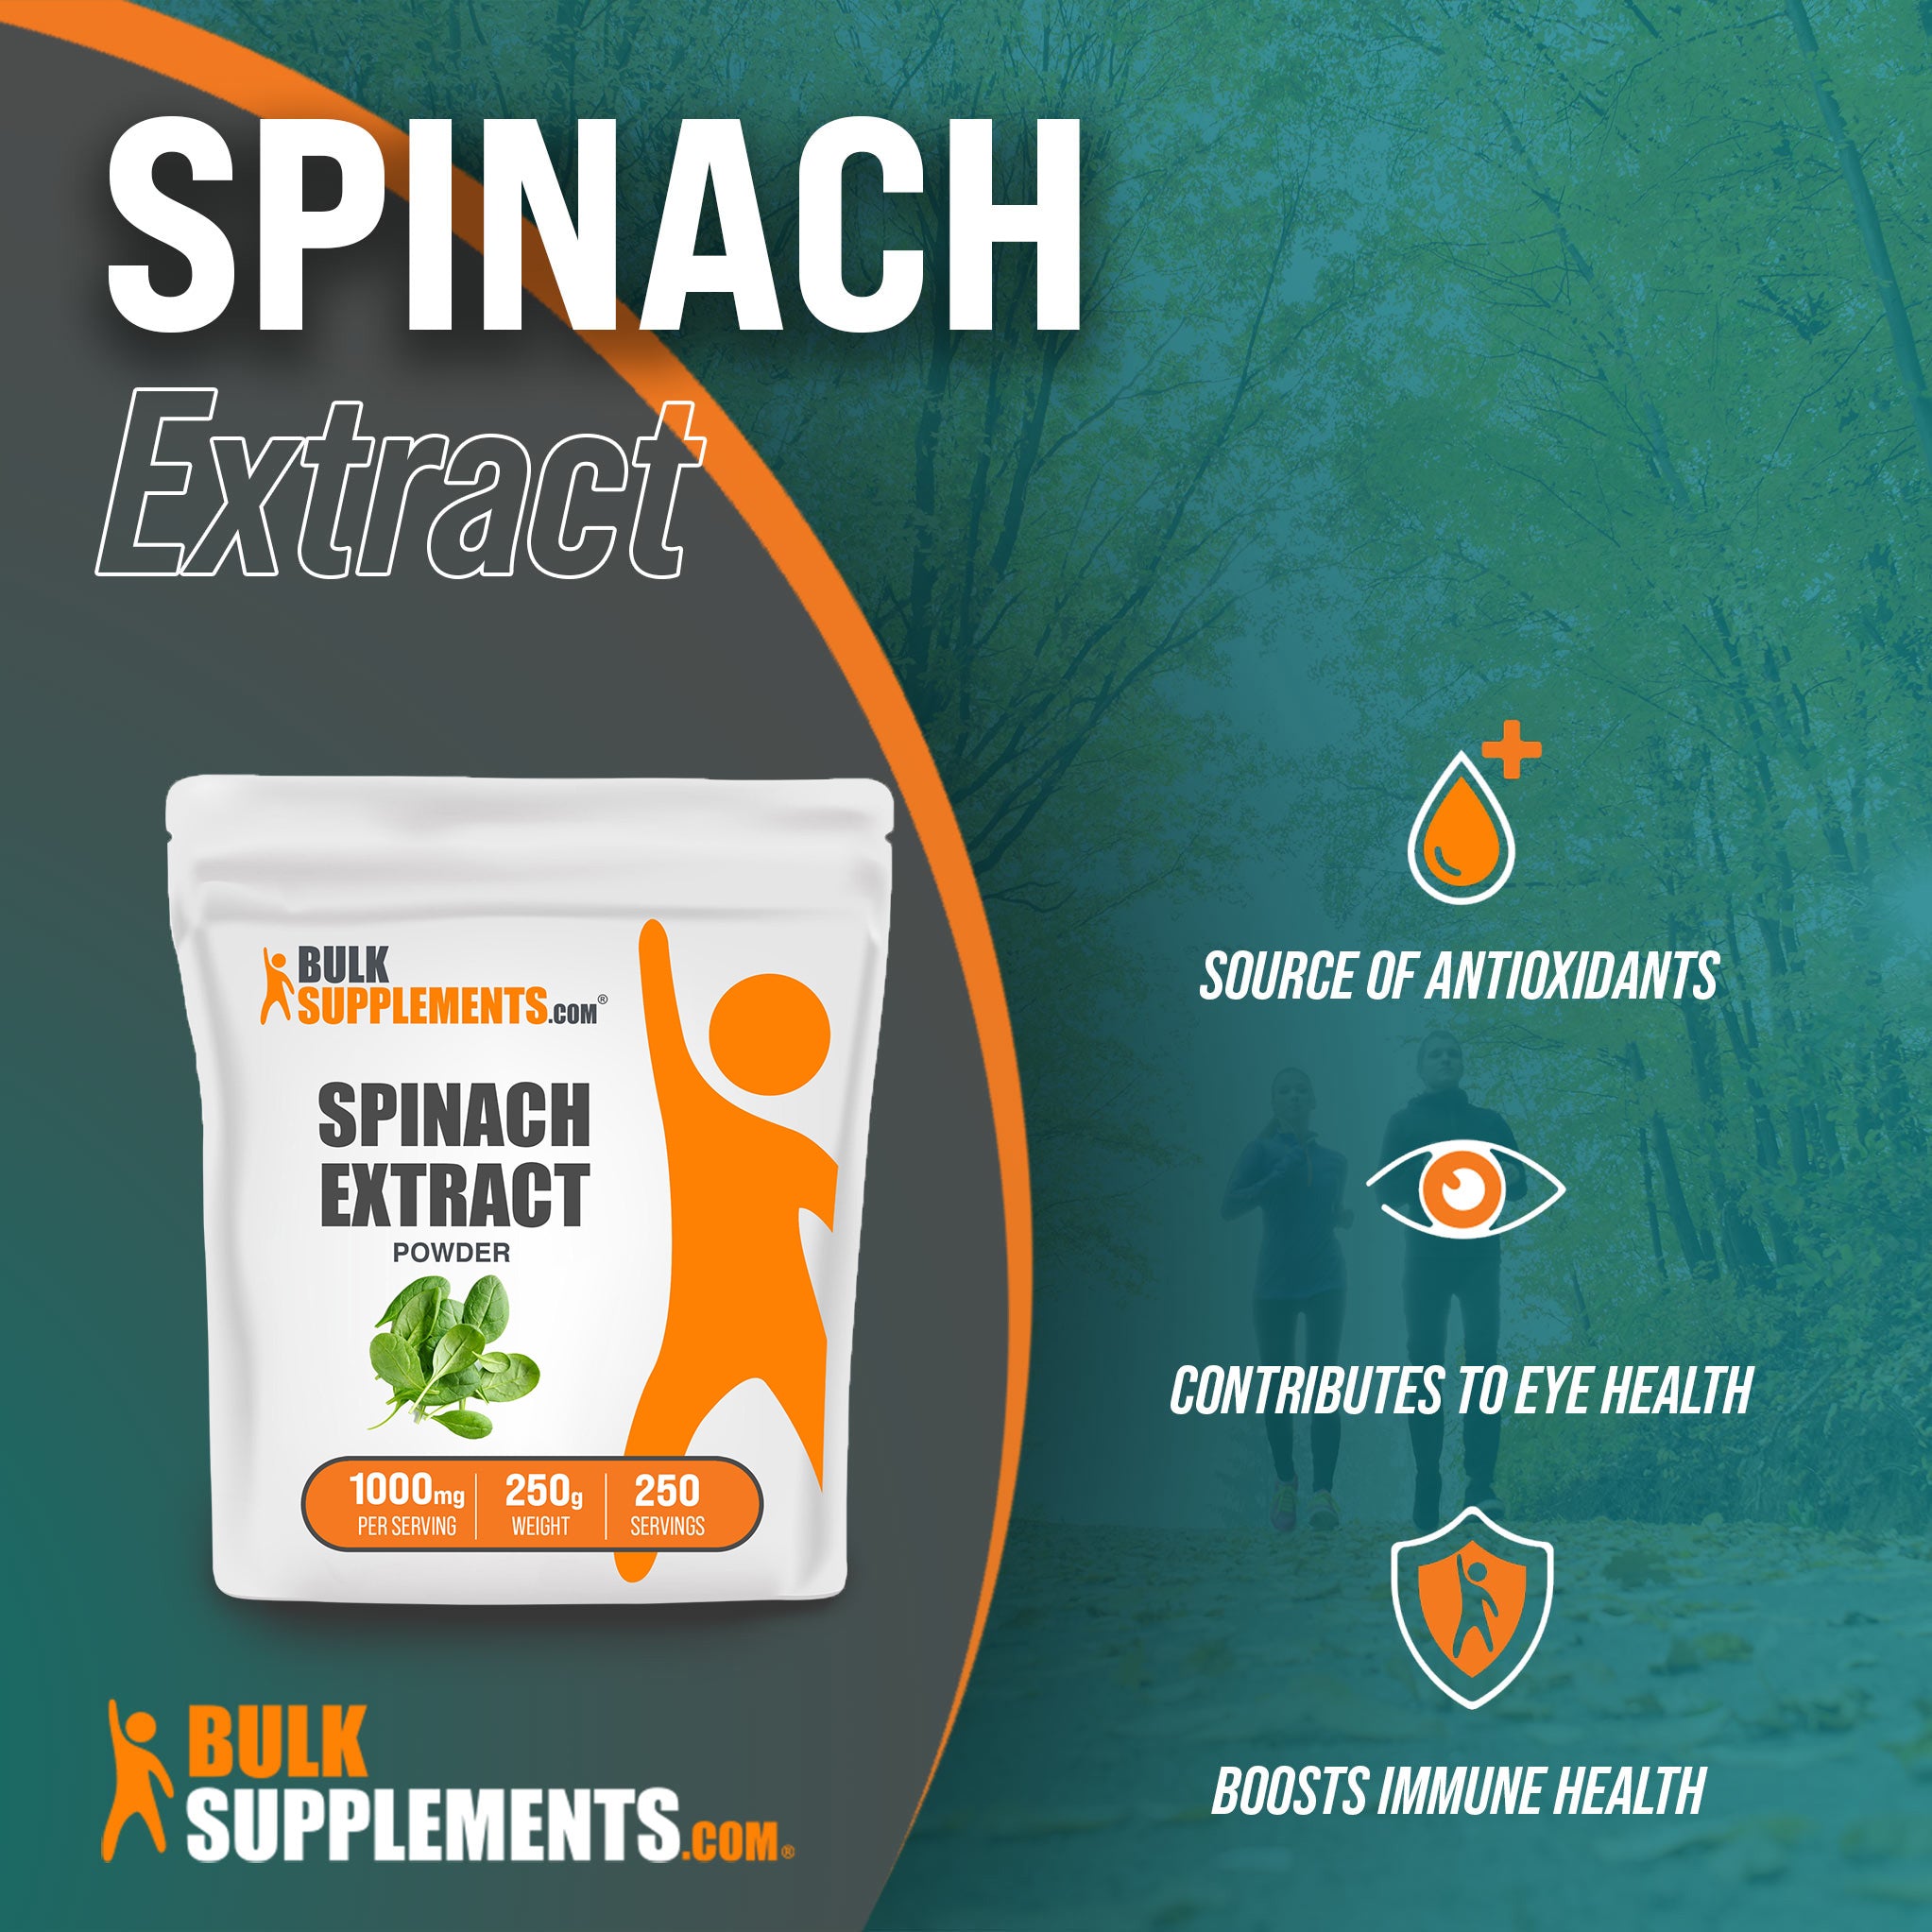 Benefits of Spinach Extract: source of antioxidants, contributes to eye health, boosts immune health